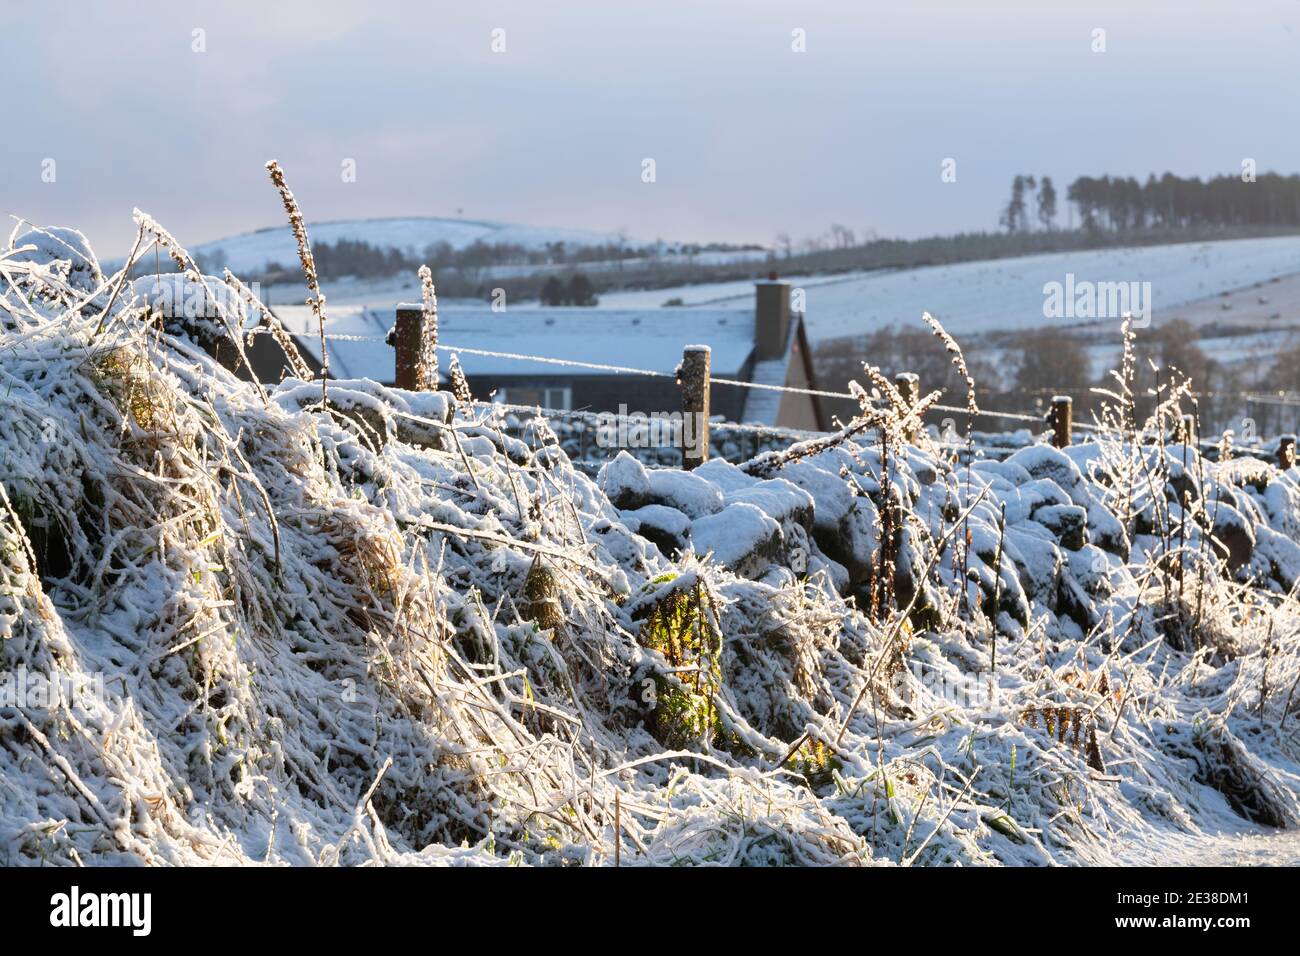 A Wildlife Habitat in Winter: Grasses and Uncultivated, Rough Vegetation Covered in Snow in Front of a Dry Stone Wall in Early Morning Sunshine Stock Photo